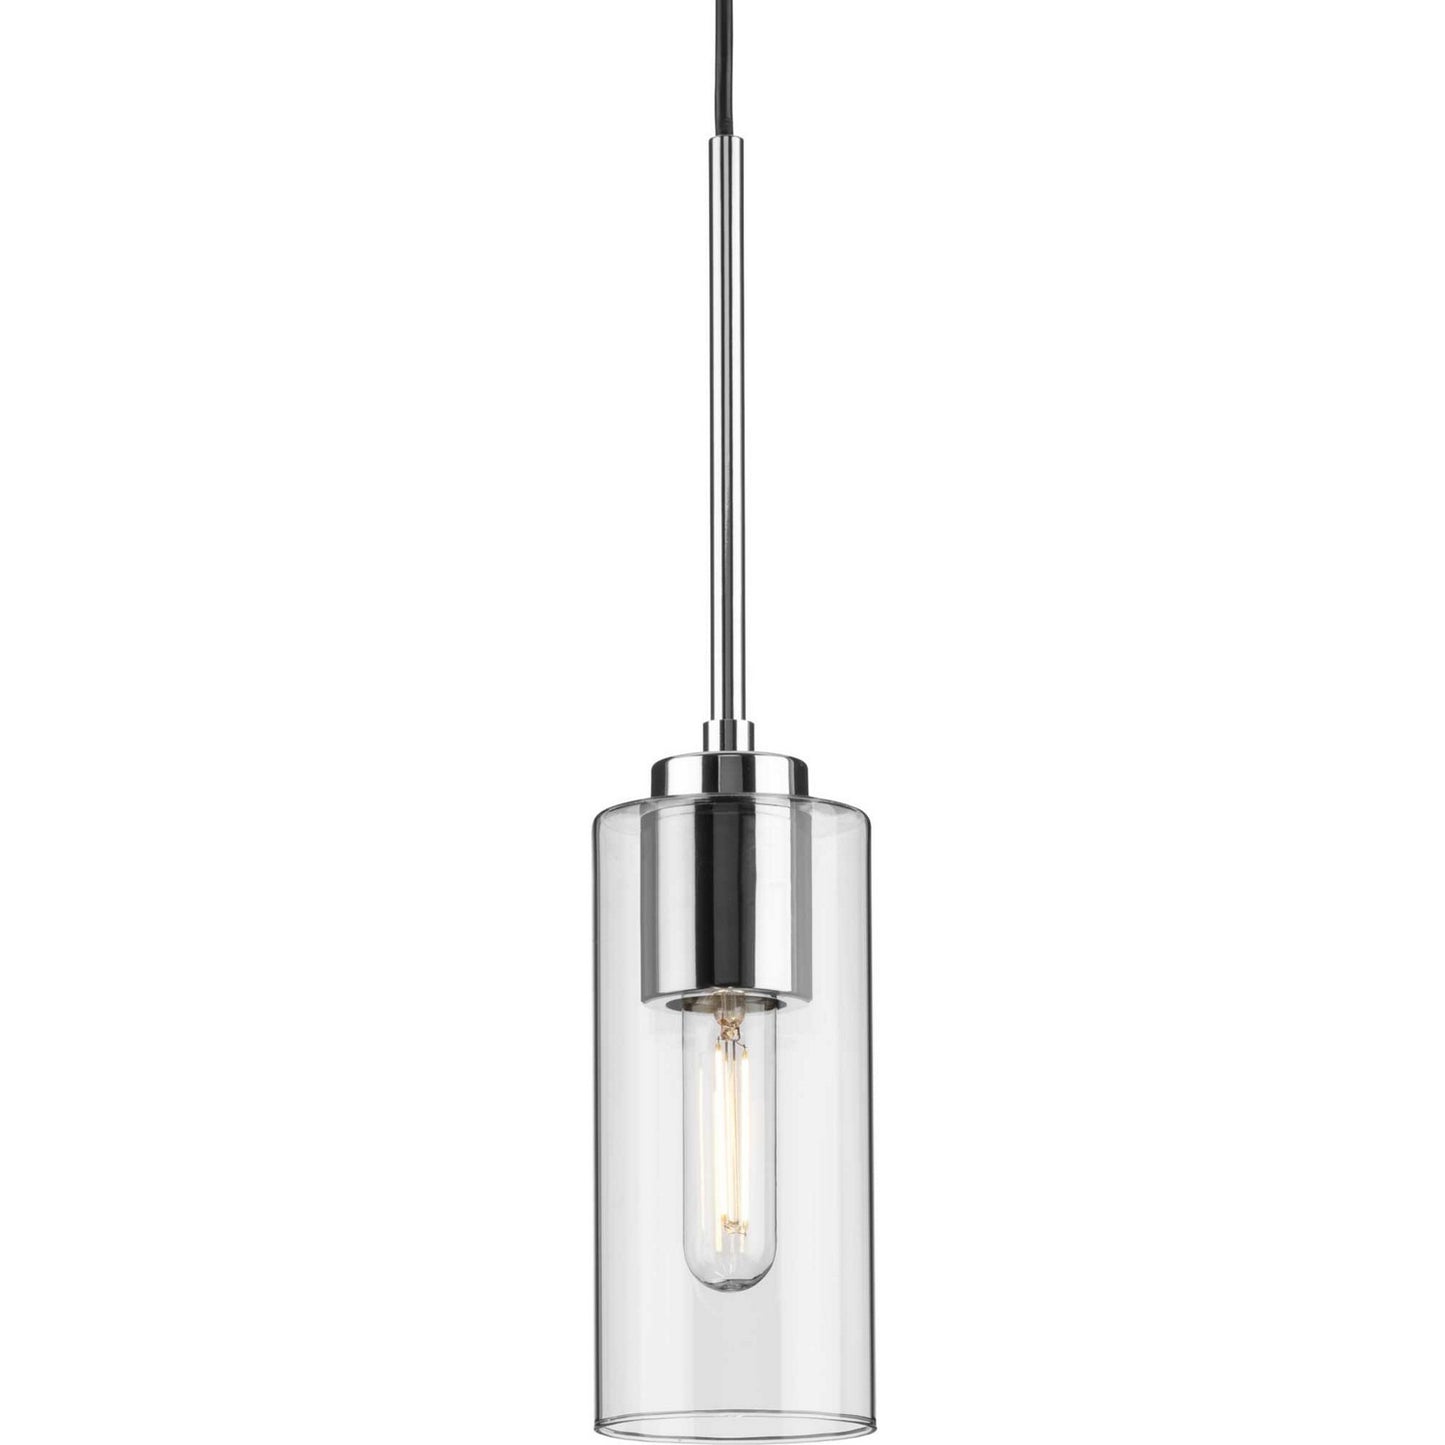 Cofield One Light Pendant by Progress Lighting in Polished Chrome Finish (P500403-015)